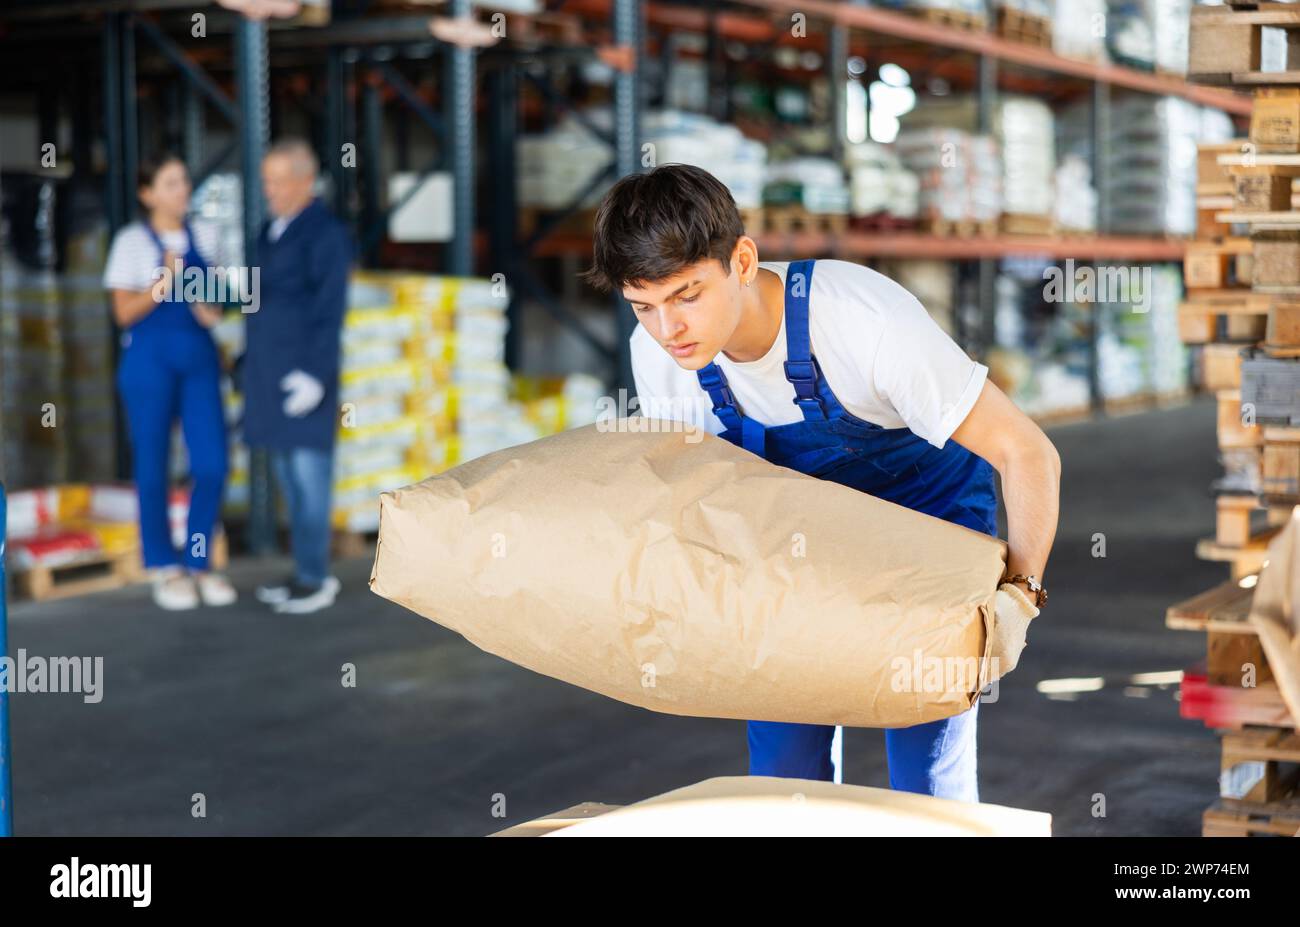 Young guy loading bags on cart in warehouse Stock Photo